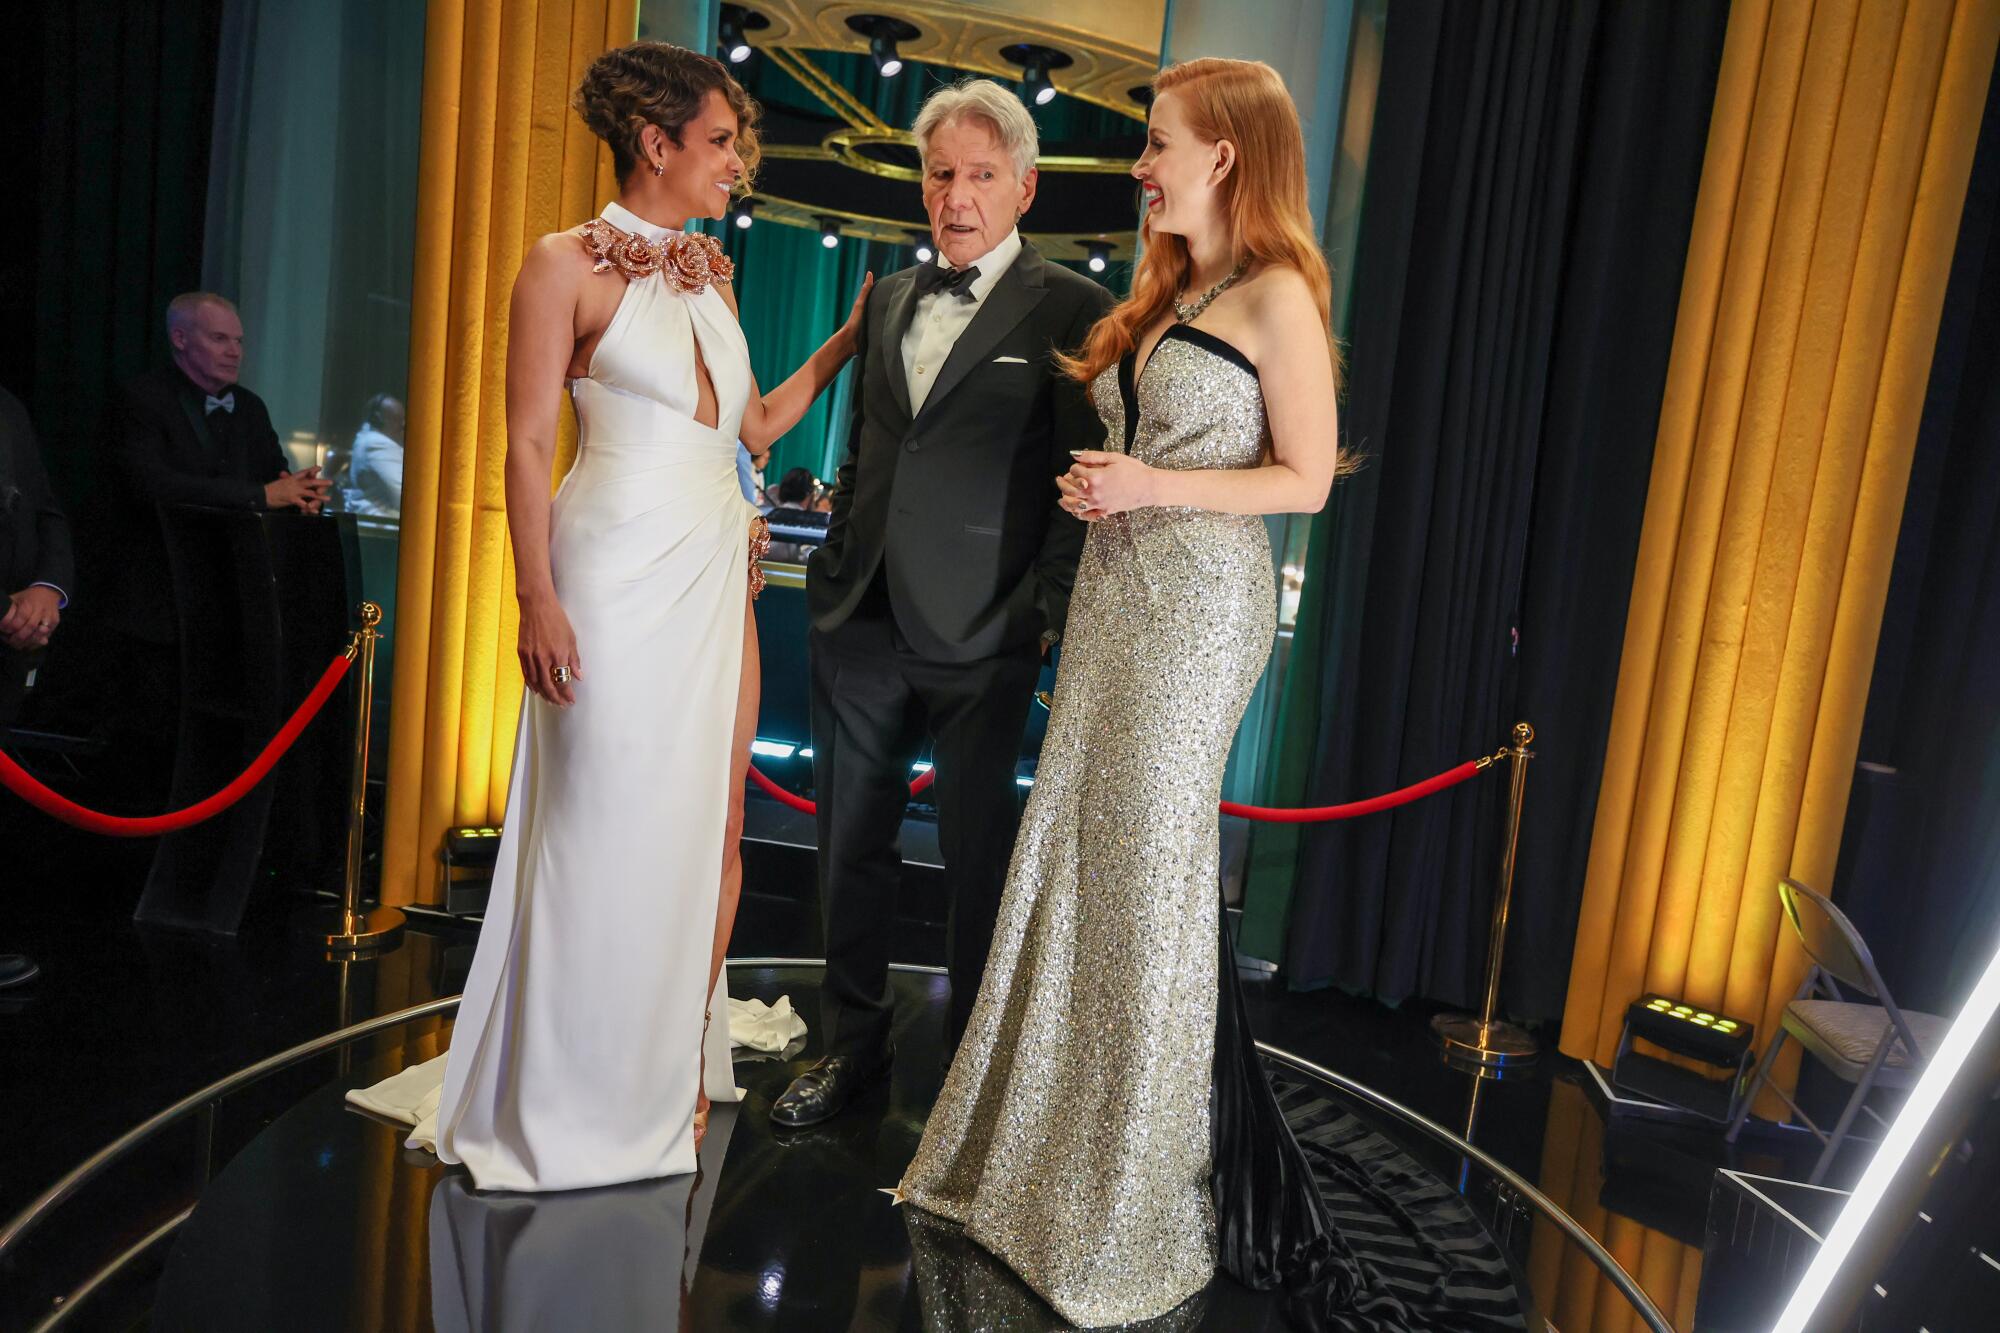 Two women in evening gowns flank a man in a tux  backstage at the Oscars.